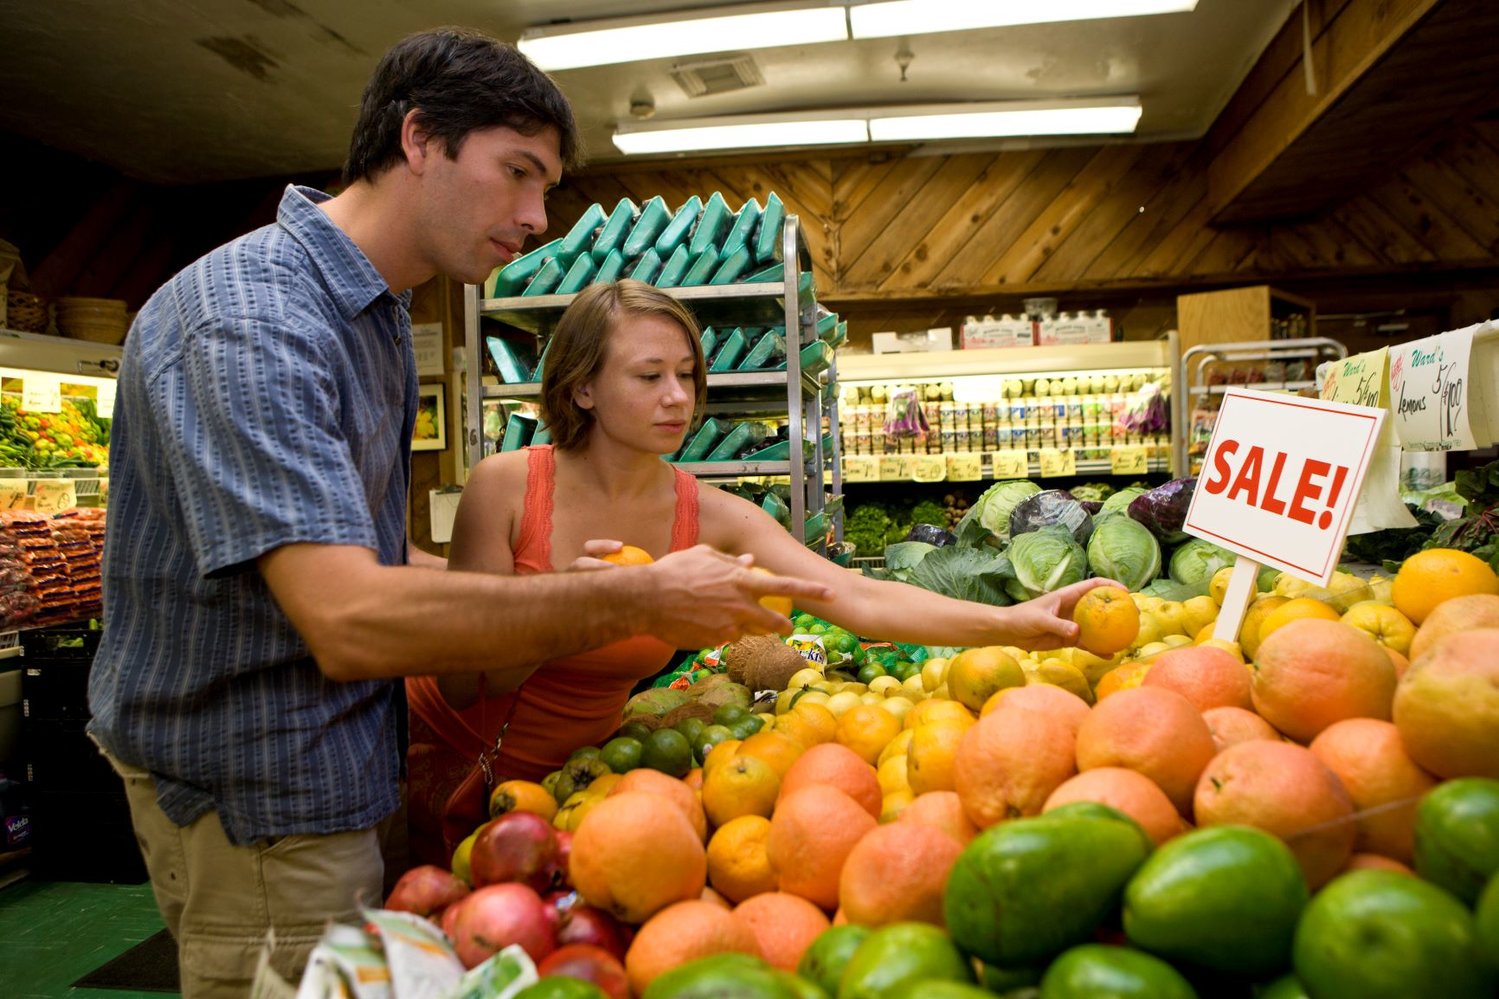 A couple (pre-COVID) picking out produce at a grocery store.